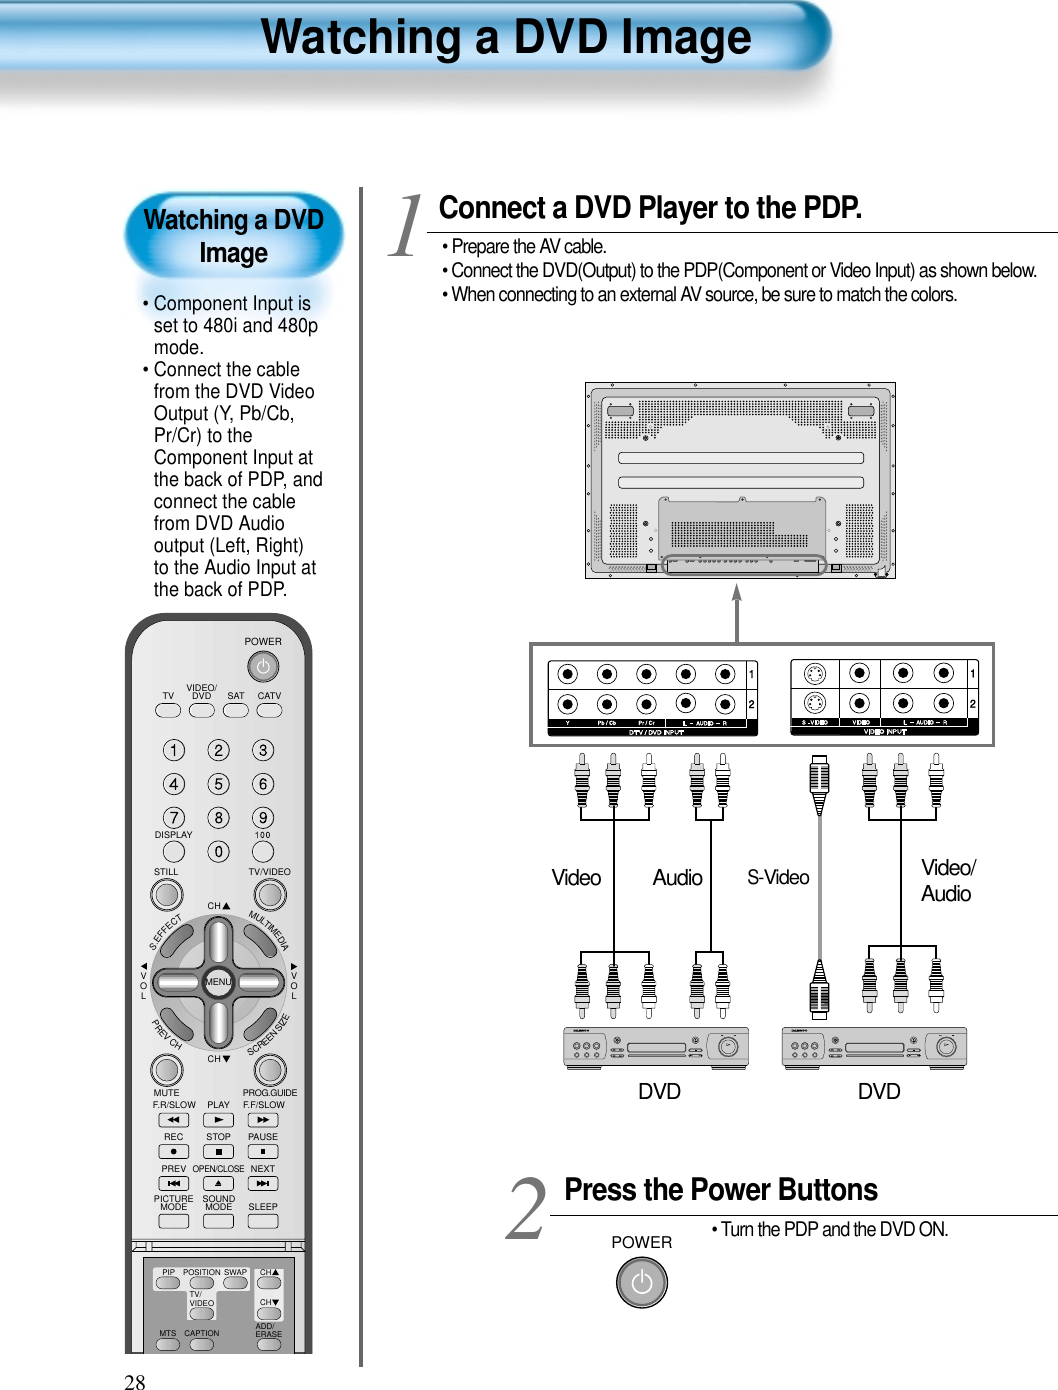 Watching a DVDImage• Component Input isset to 480i and 480pmode.• Connect the cablefrom the DVD VideoOutput (Y, Pb/Cb,Pr/Cr) to theComponent Input atthe back of PDP, andconnect the cablefrom DVD Audiooutput (Left, Right)to the Audio Input atthe back of PDP.Watching a DVD Image28VIDEO/DVD SATTV CATVDISPLAYTV/VIDEOSTILLCHCHVOLVOLMULTIMEDIAS.EFFECTMENUPREVCHSCREENSIZEMUTE PROG.GUIDEF.F/SLOWPLAYF.R/SLOWREC STOP PAUSEPREVOPEN/CLOSENEXTPICTUREMODE SOUNDMODE SLEEPPOWERMTS CAPTIONPIP POSITION SWAPTV/VIDEOADD/ERASECHCHPress the Power Buttons• Turn the PDP and the DVD ON.2POWERConnect a DVD Player to the PDP.• Prepare the AV cable.• Connect the DVD(Output) to the PDP(Component or Video Input) as shown below.• When connecting to an external AV source, be sure to match the colors.1VideoDVD DVDVideo/AudioS-VideoAudio